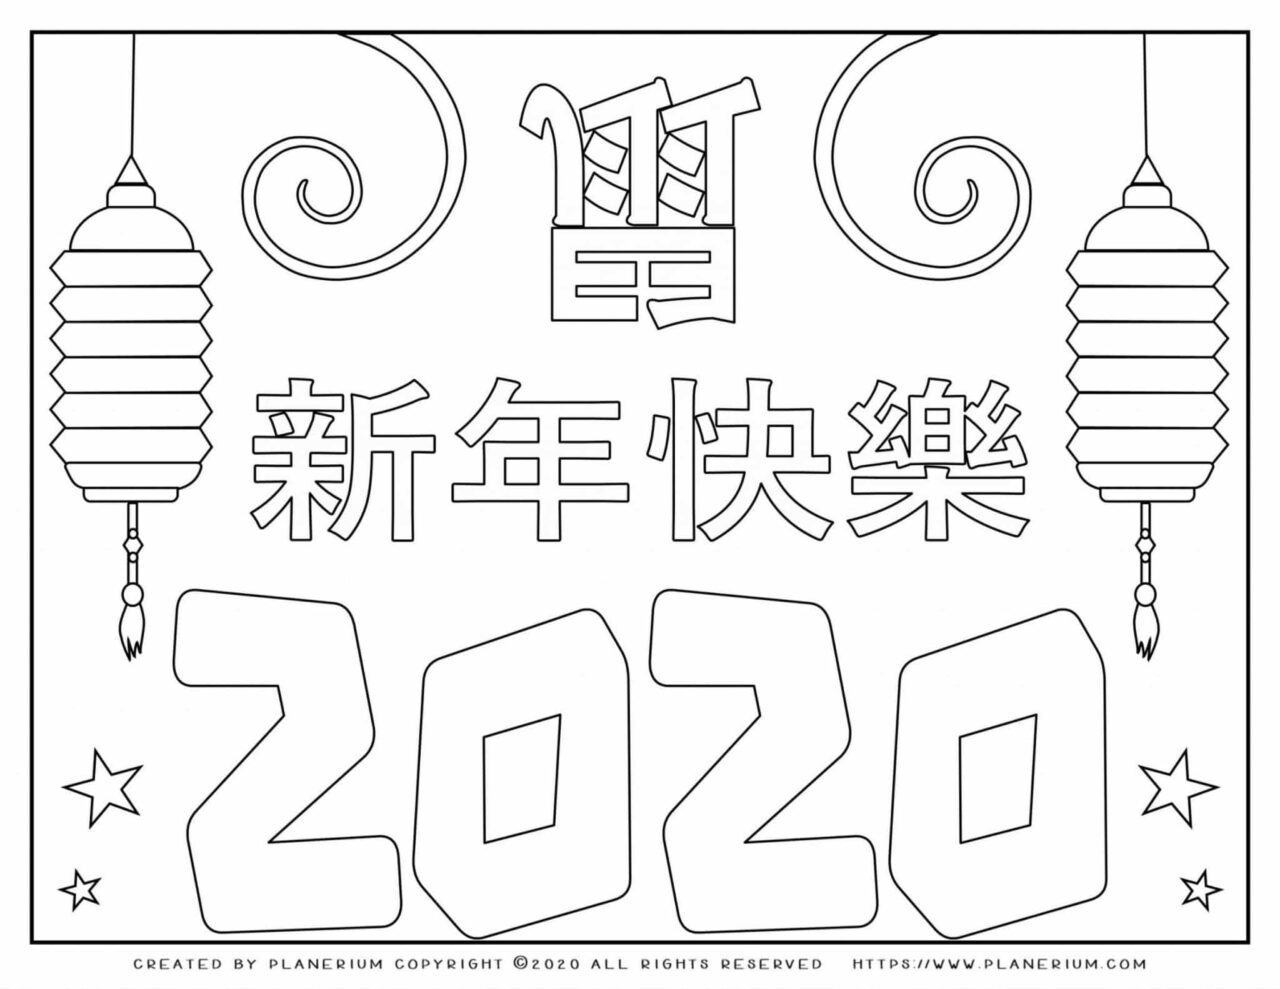 Lunar New Year Chinese Year of the Rat 2020 - Coloring Page - Decor | Planerium